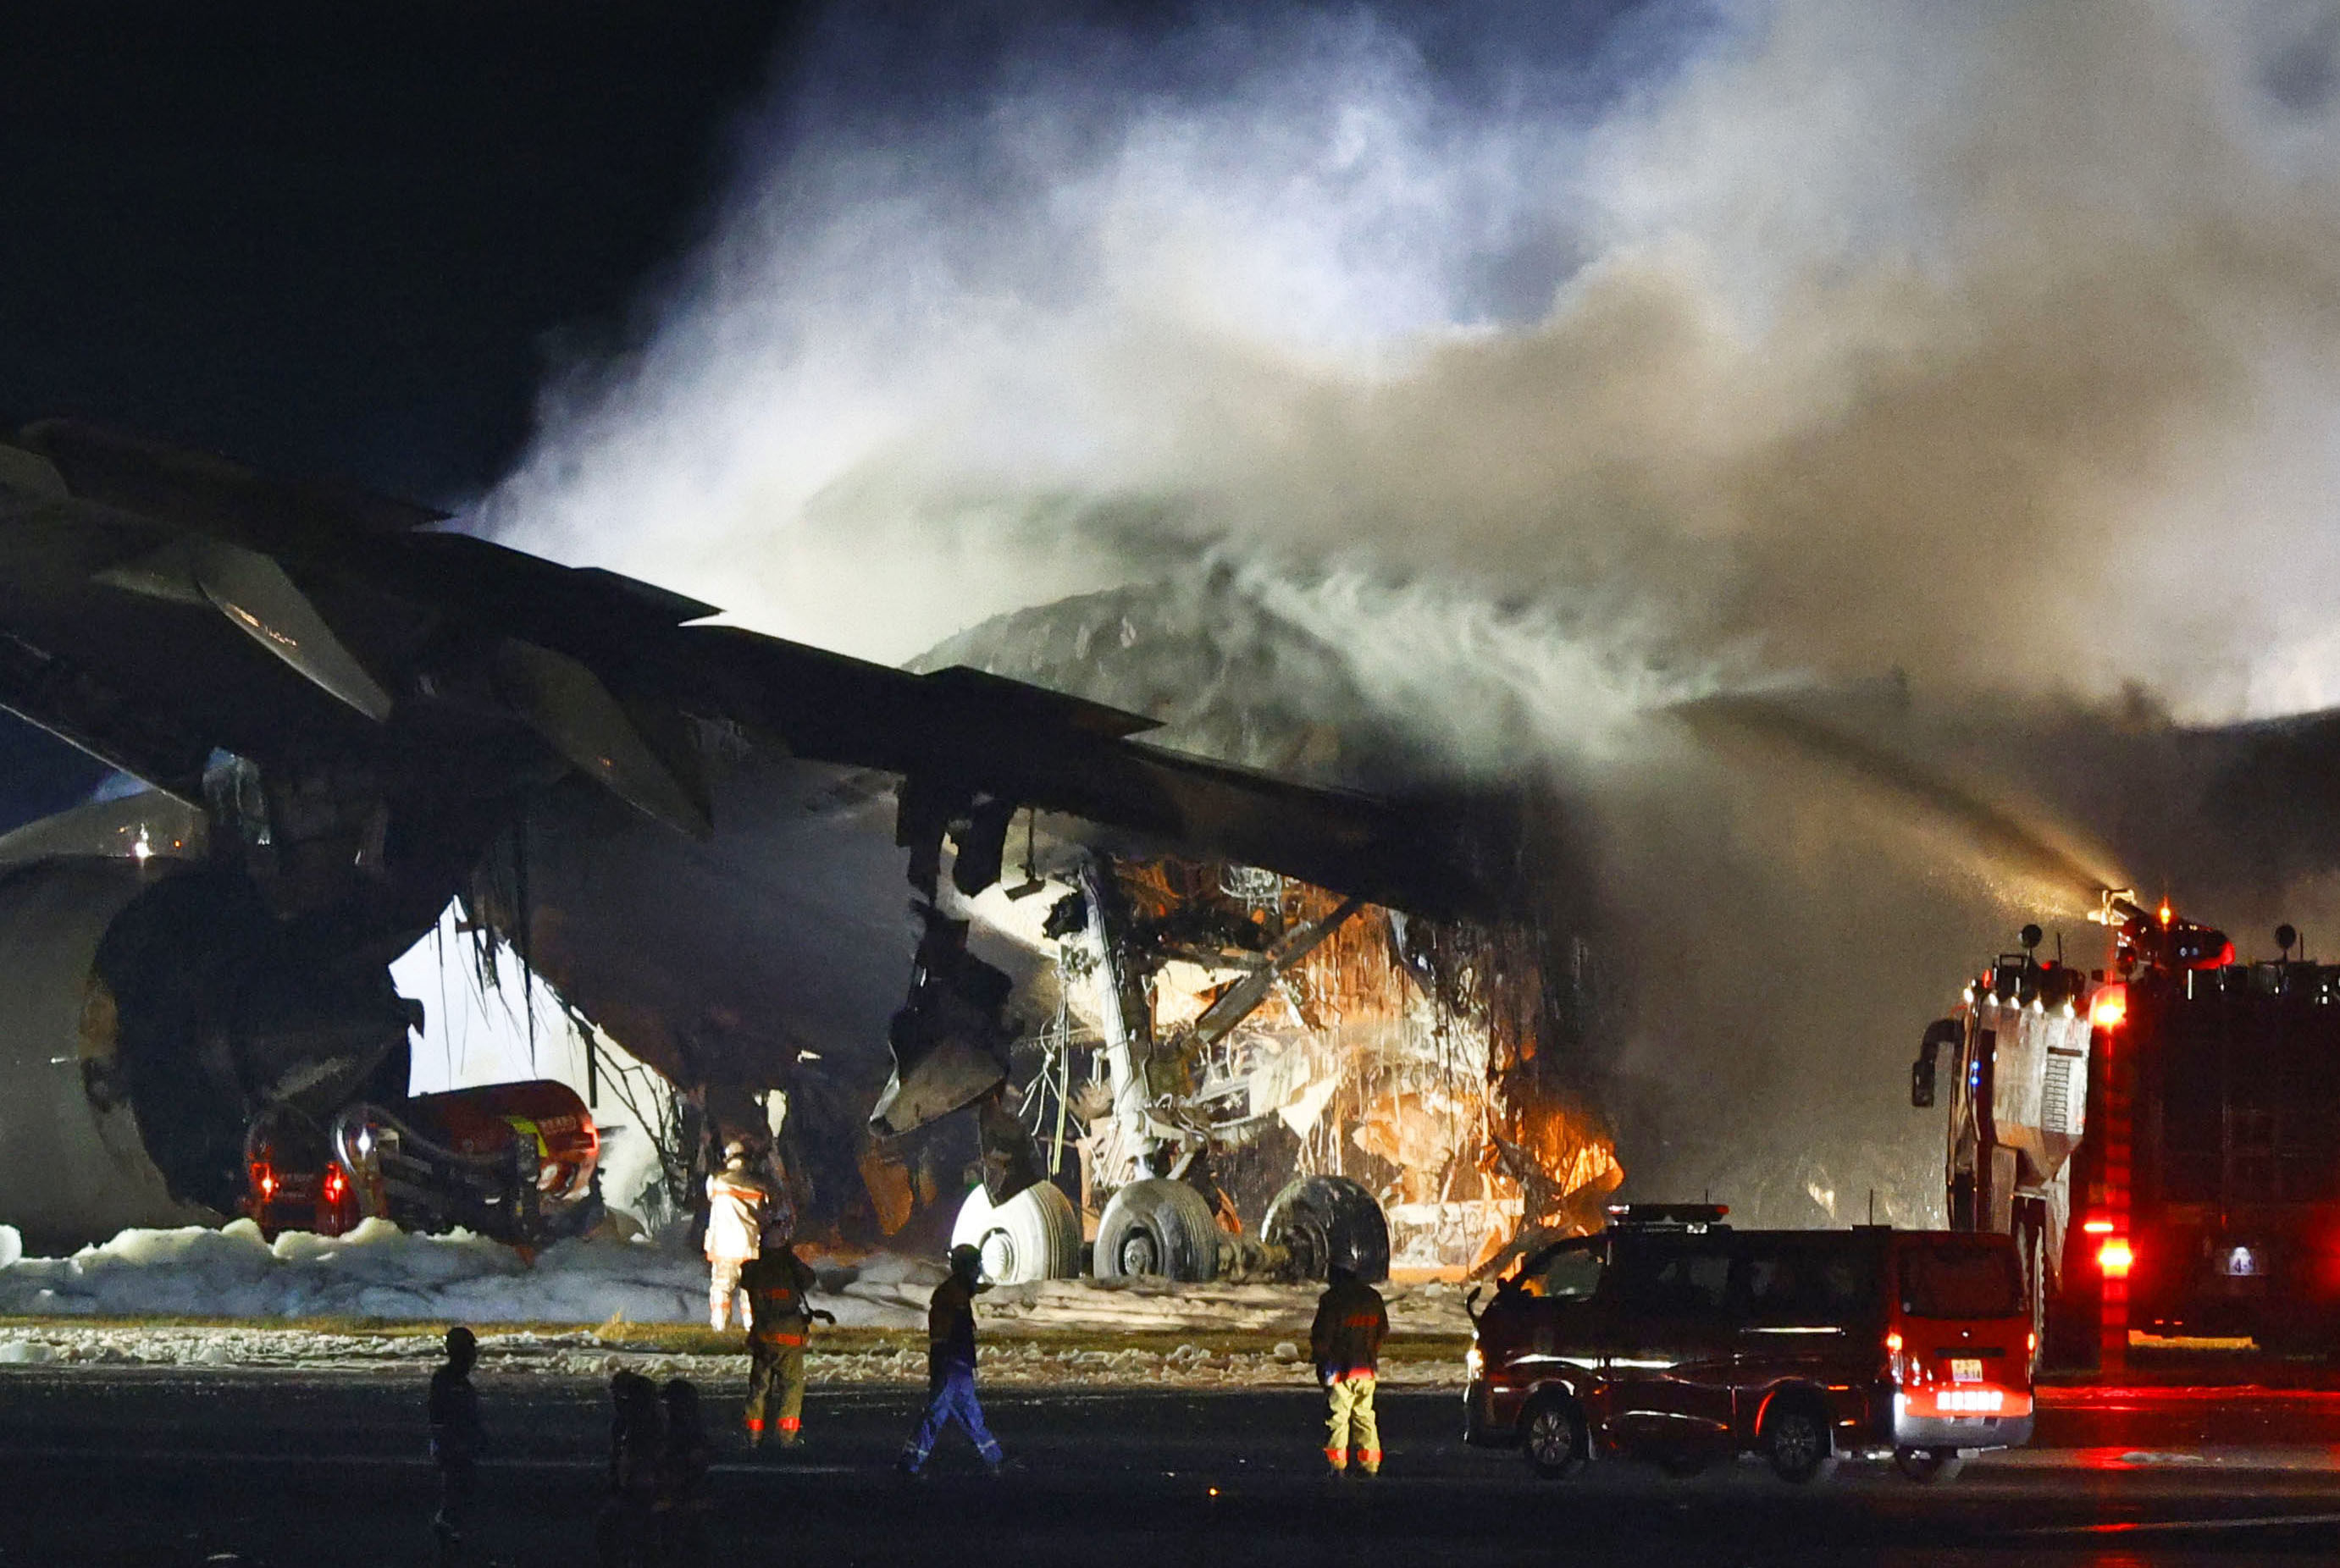 Firefighters battle the blaze that broke out on the Japan Airlines plane after it had collided with a coastguard aircraft on a runway at Haneda airport in Tokyo on Tuesday evening. Photo: Kyodo